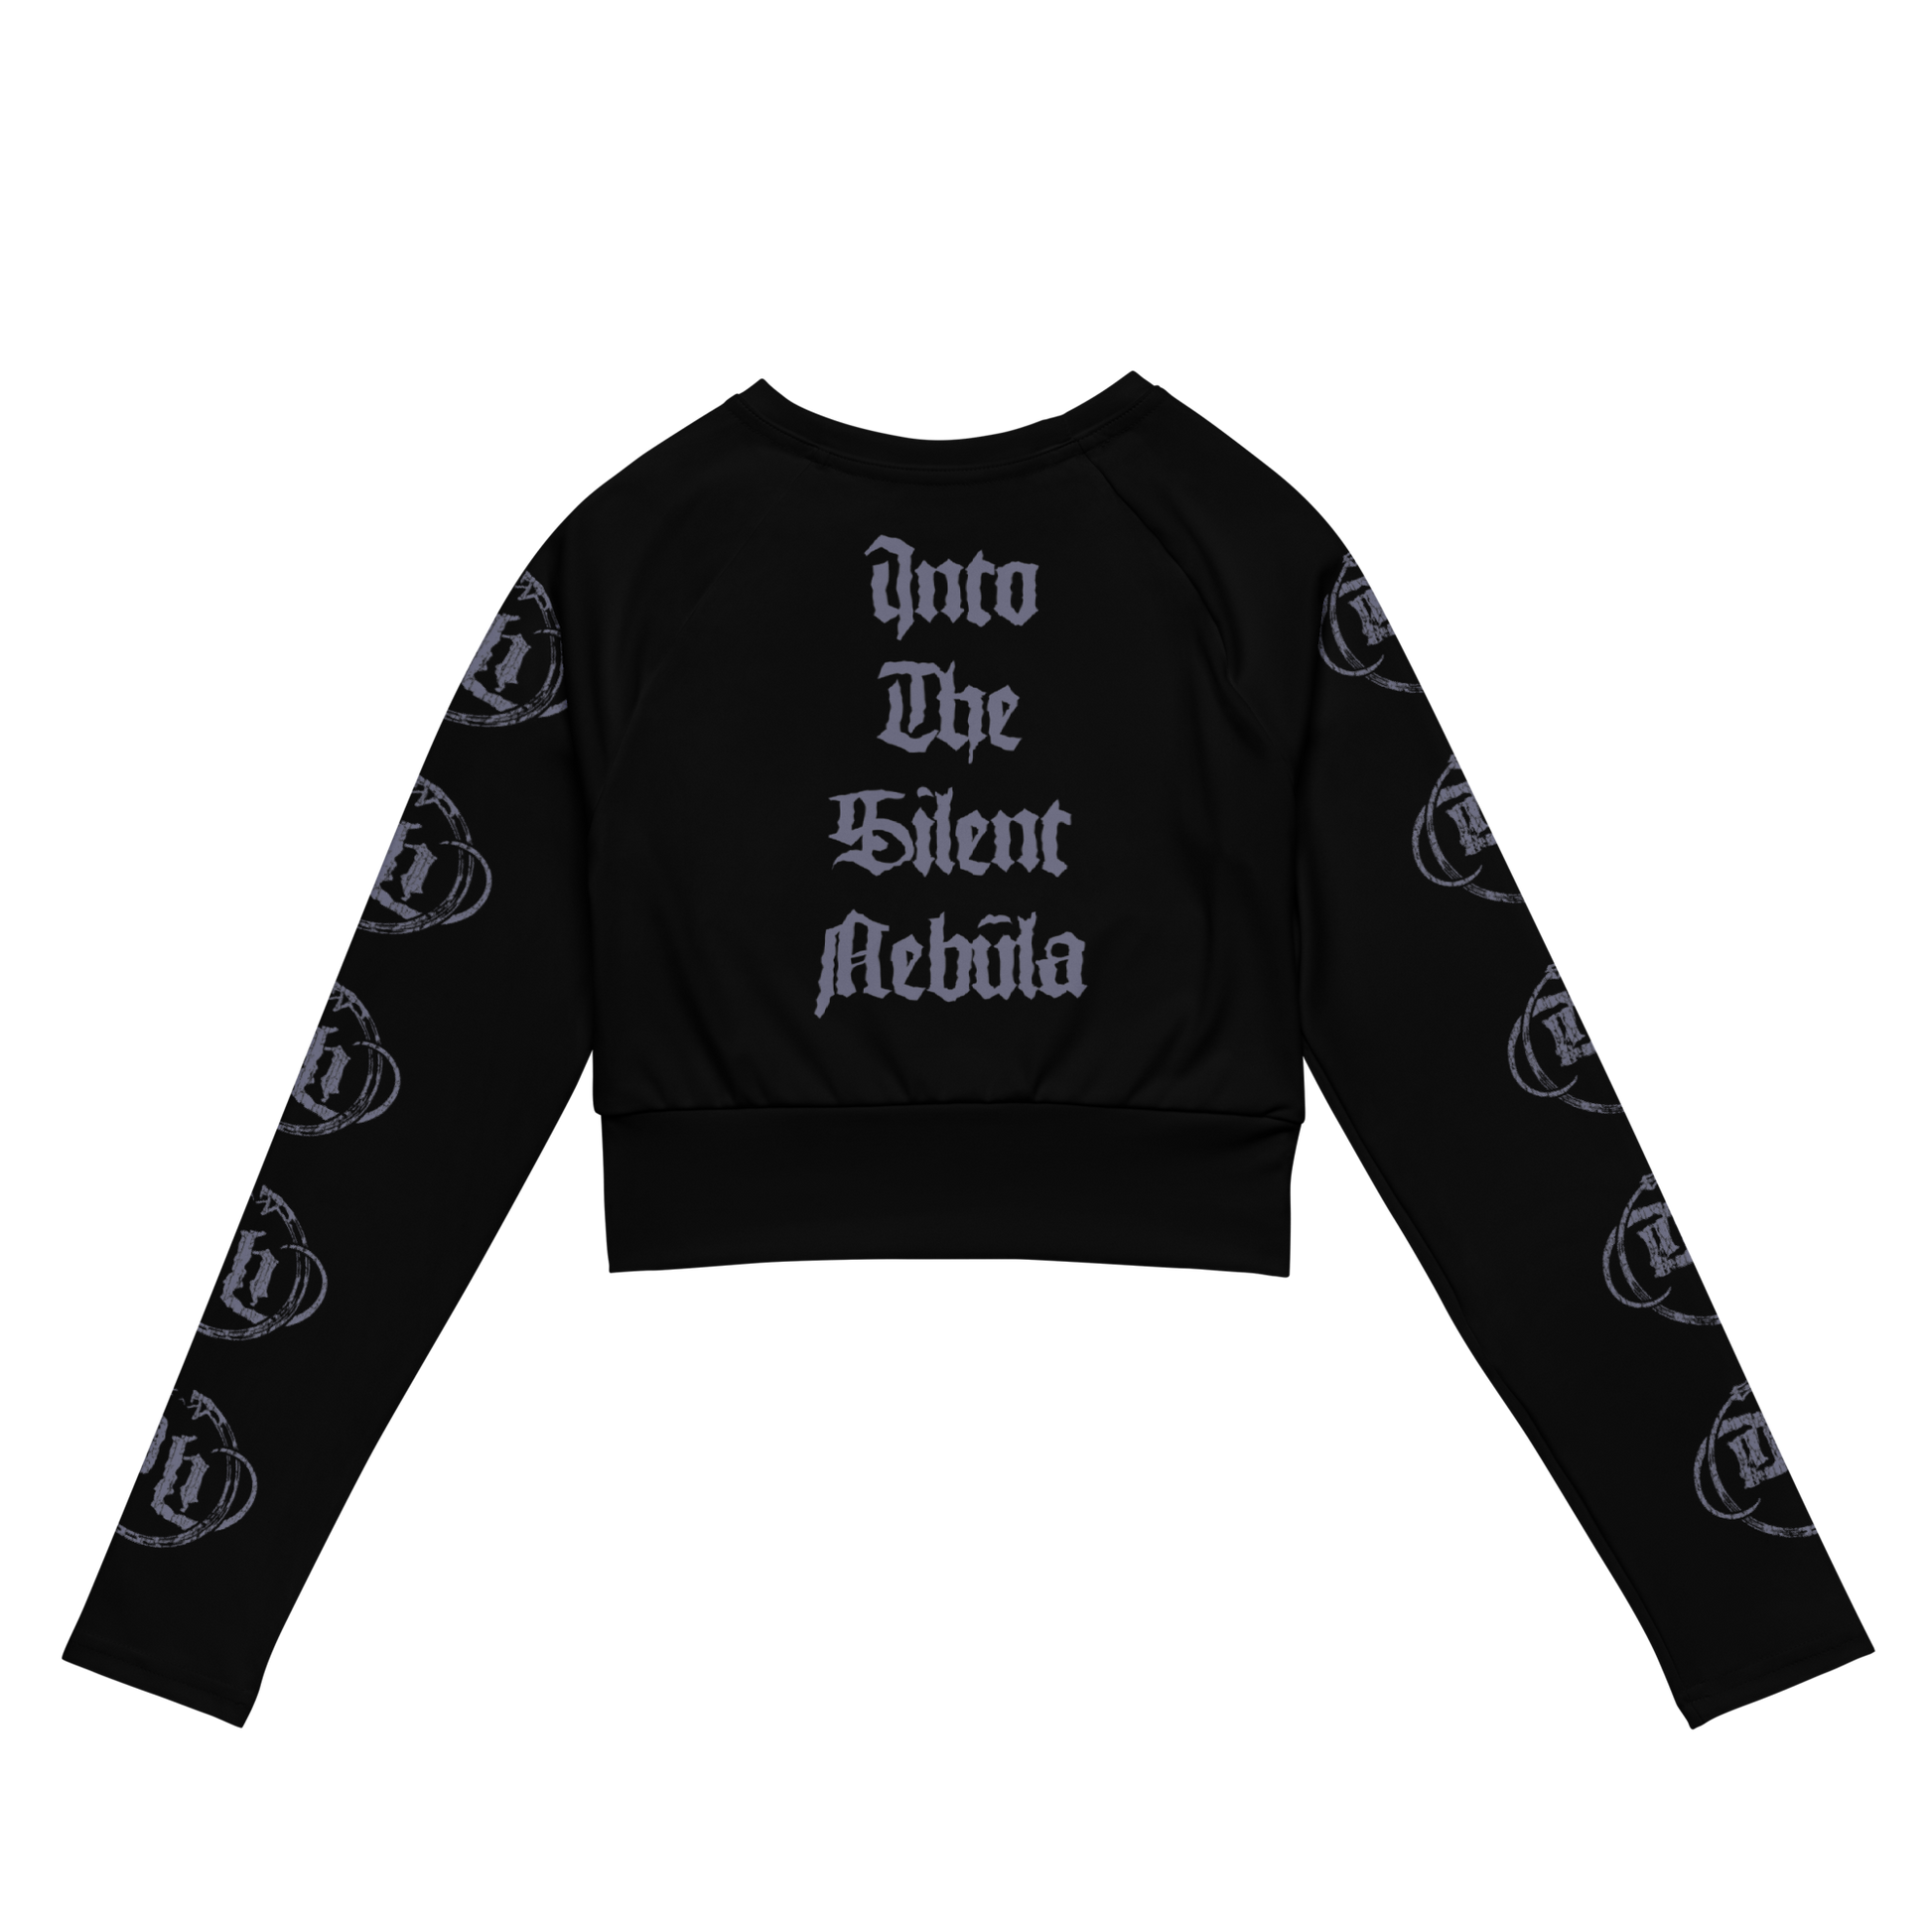 Damnation's Hammer Into the Silent Nebula official long sleeve crop top by Metal Mistress